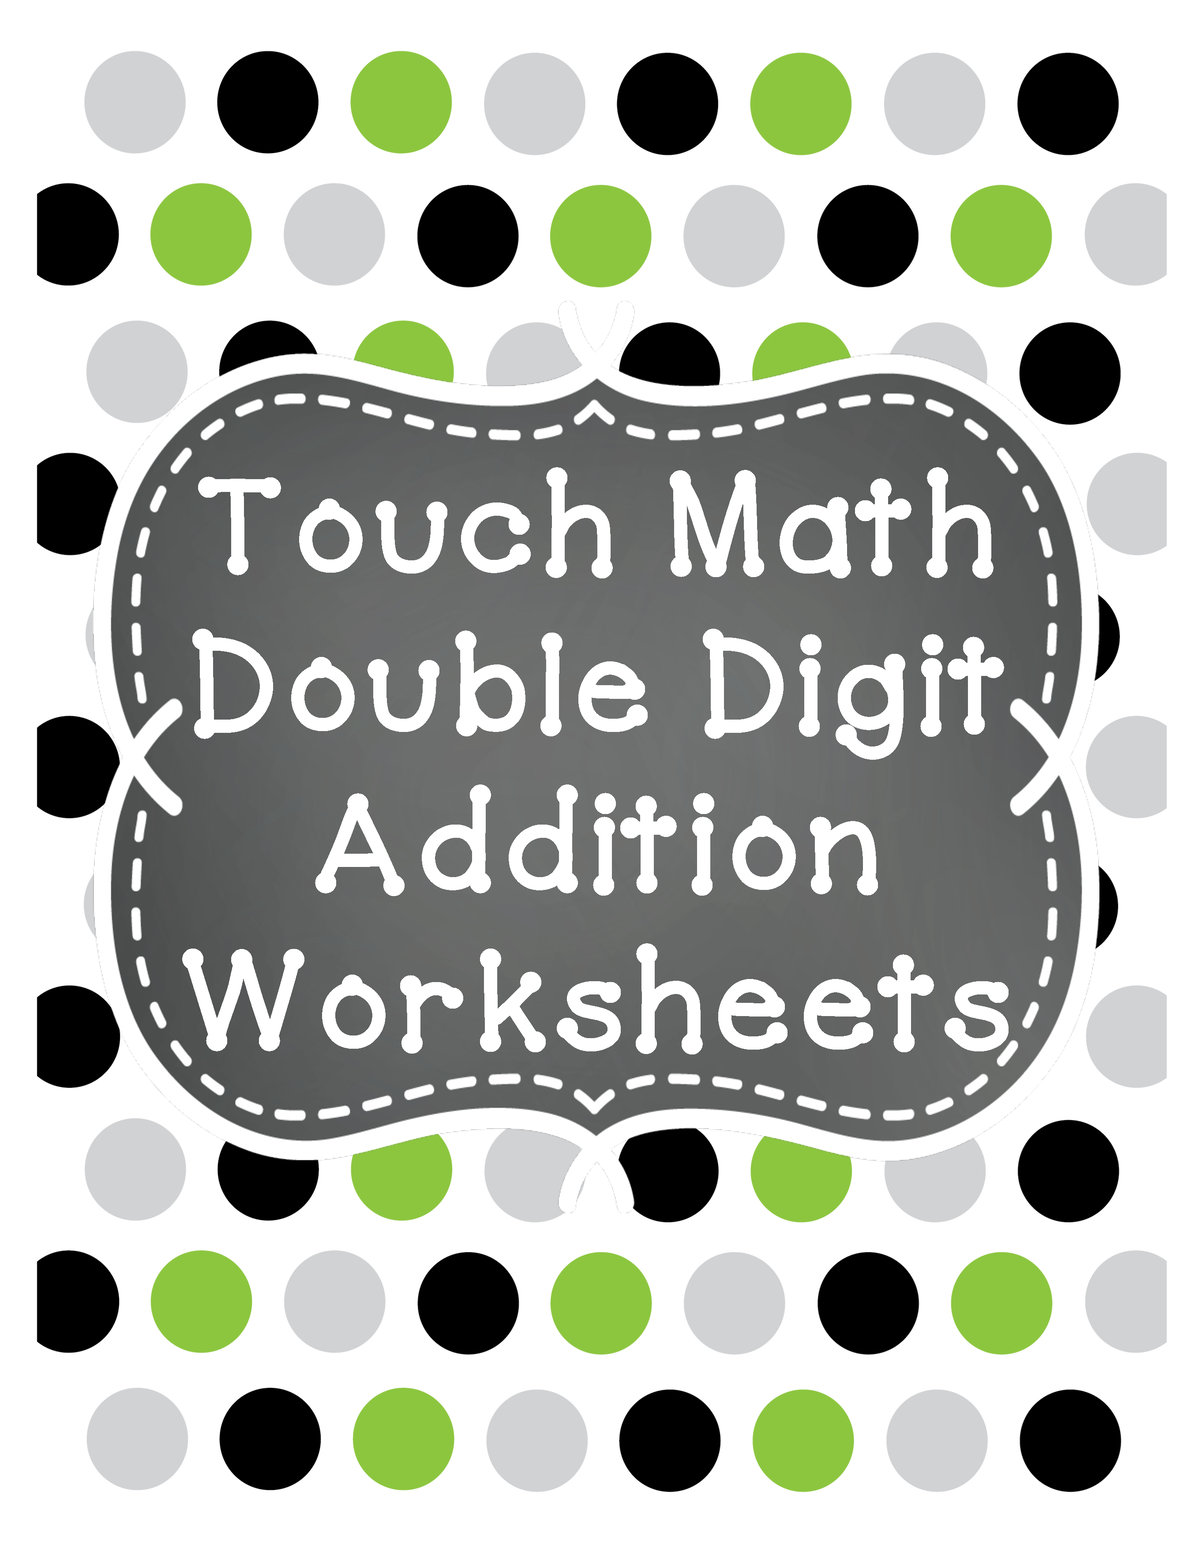 touch-math-double-digit-addition-worksheets-1-touch-math-double-digit-addition-worksheets-name